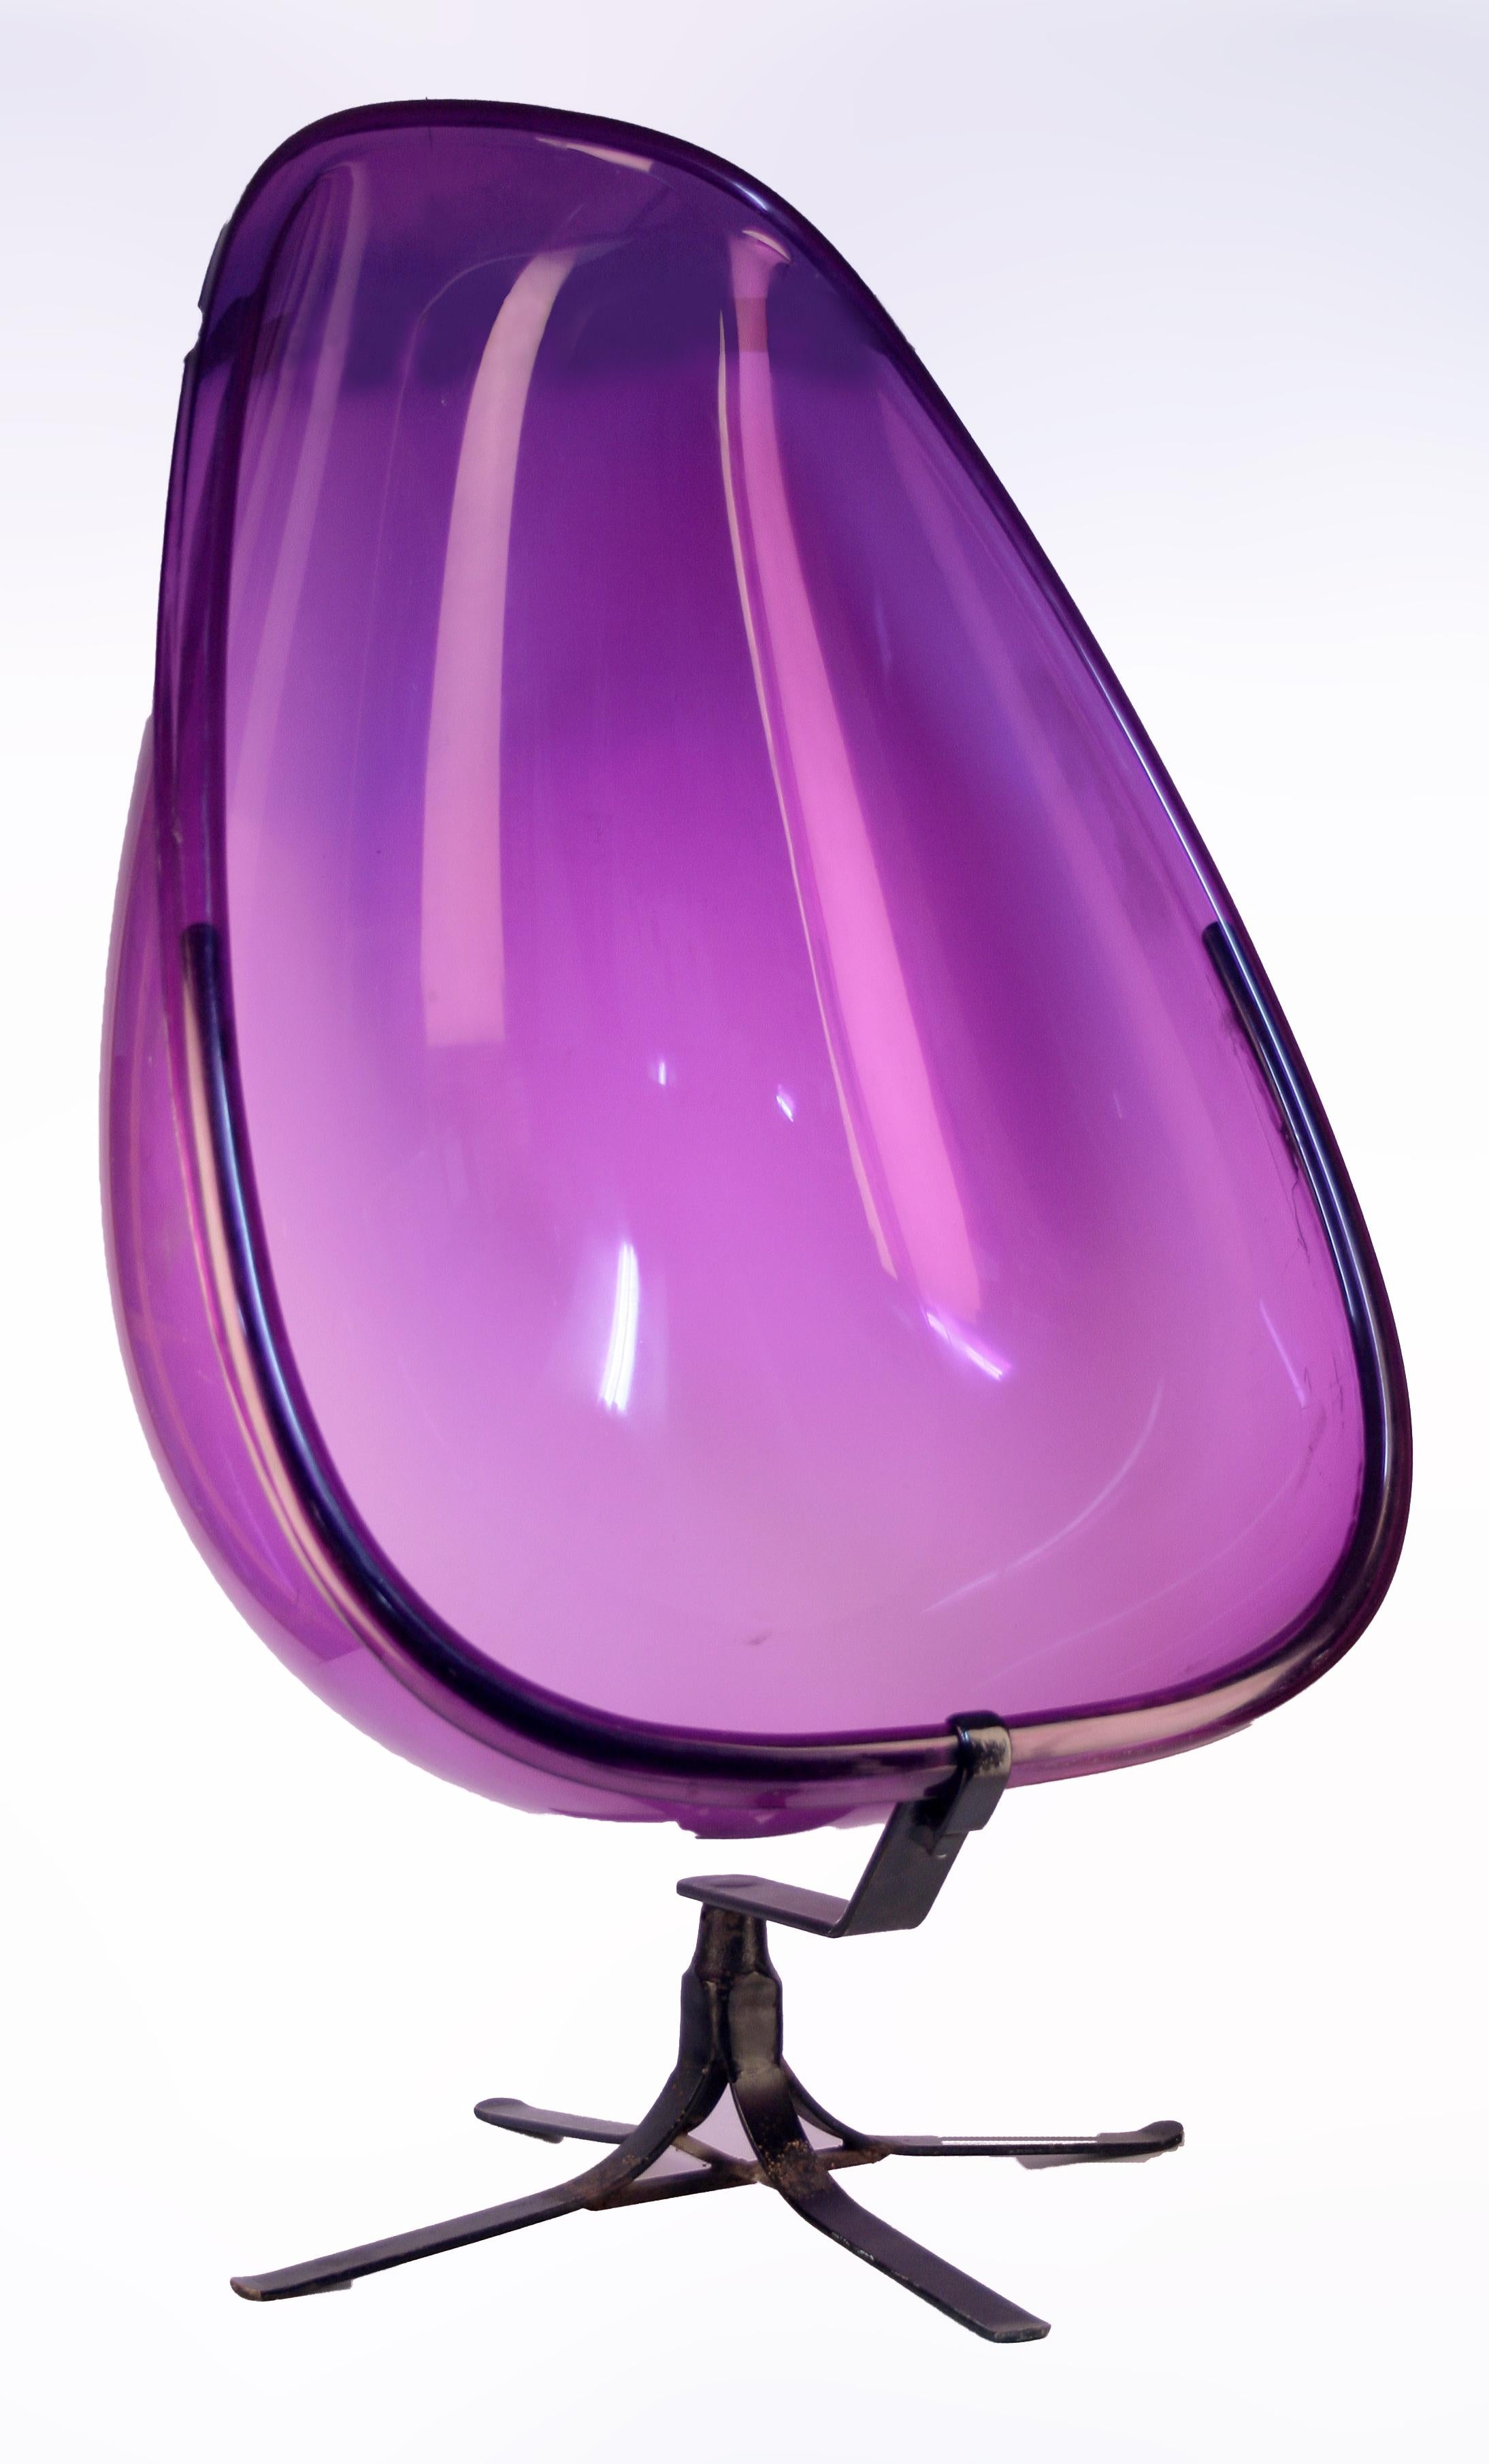 Mid-20th century Modern/Space Age american egg shaped acrylic purple chair with iron legs

By: Thor Larsen (in the style of)
Material: metal, iron, synthetic, acrylic, plastic,
Technique: hammered, forged, molded, metalwork
Dimensions: 196 in  x